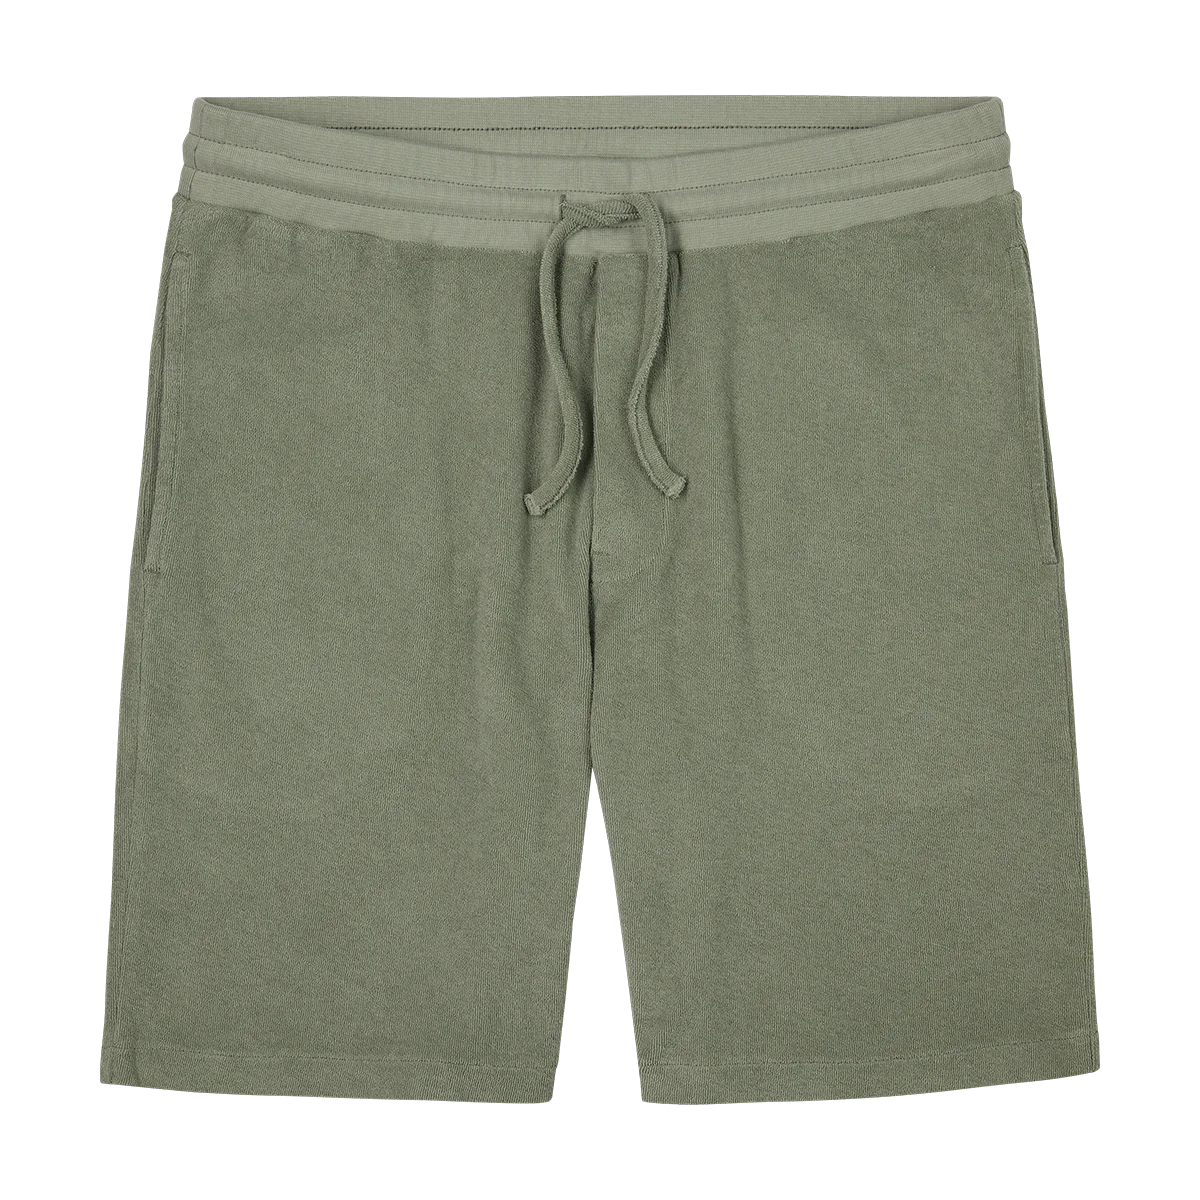 Day Towelling Short